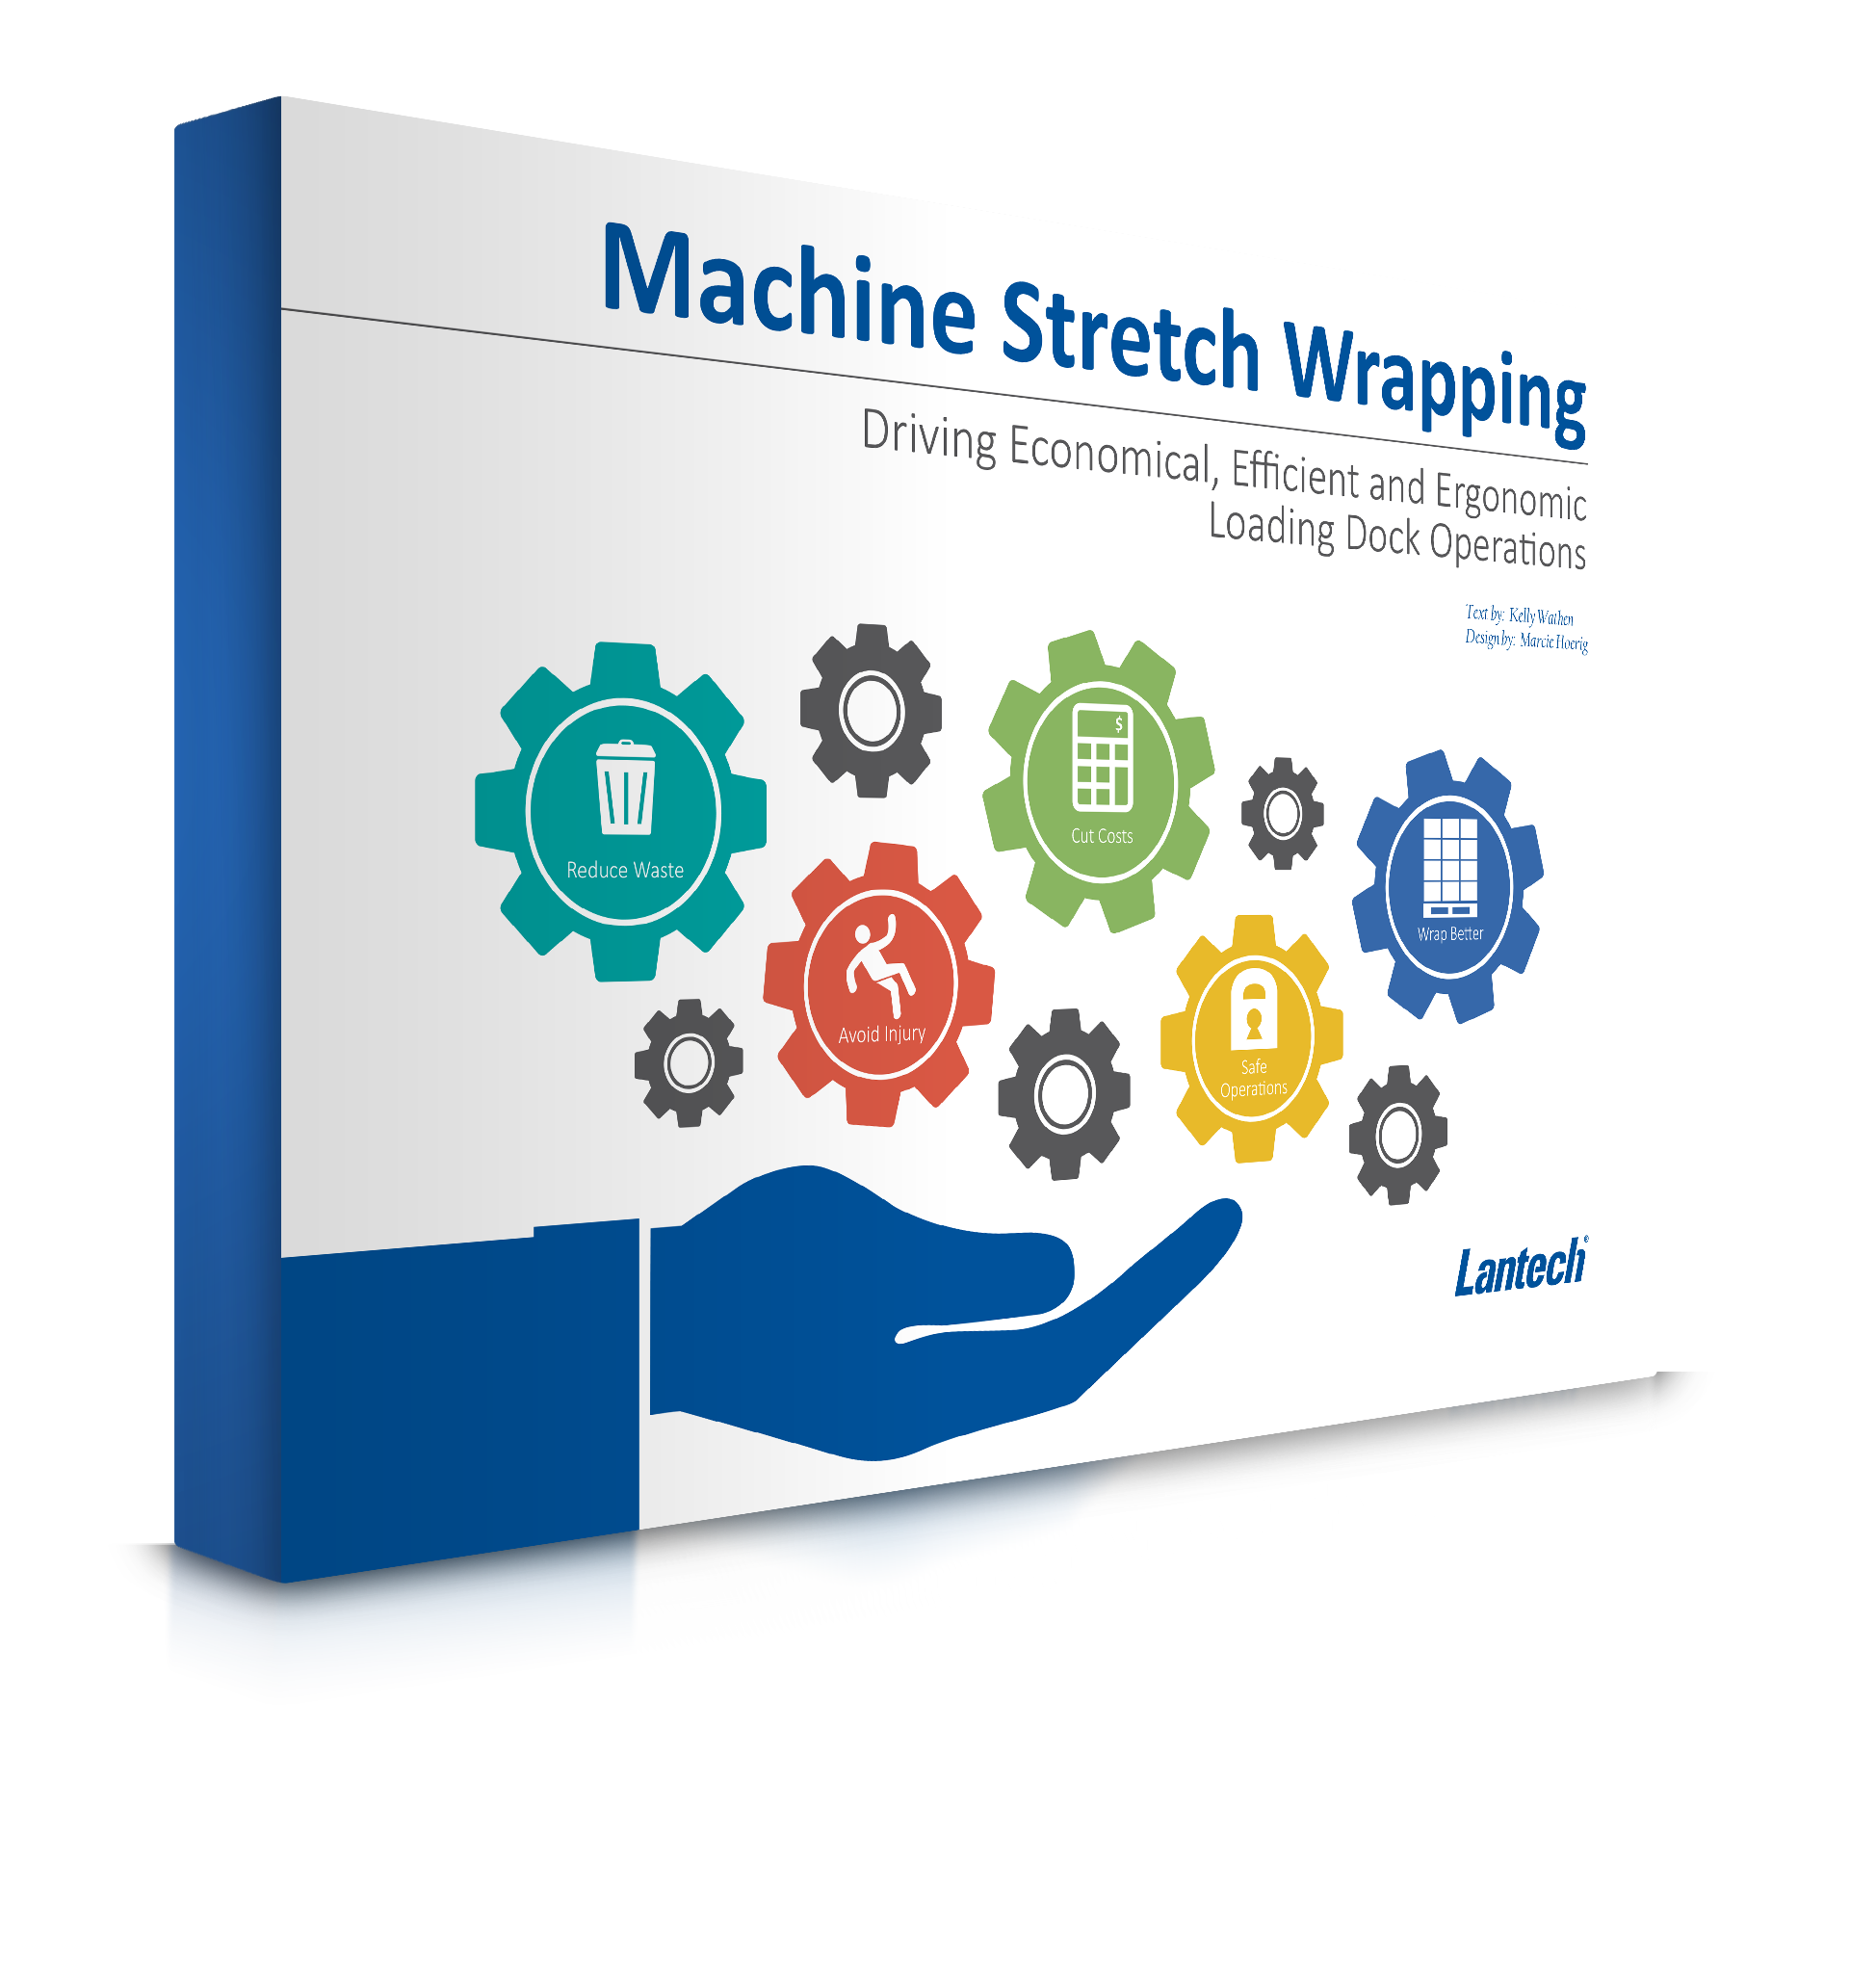 Lantech_MOFU_Machine_Stretch_Wrapping_eBook_cover_image.png